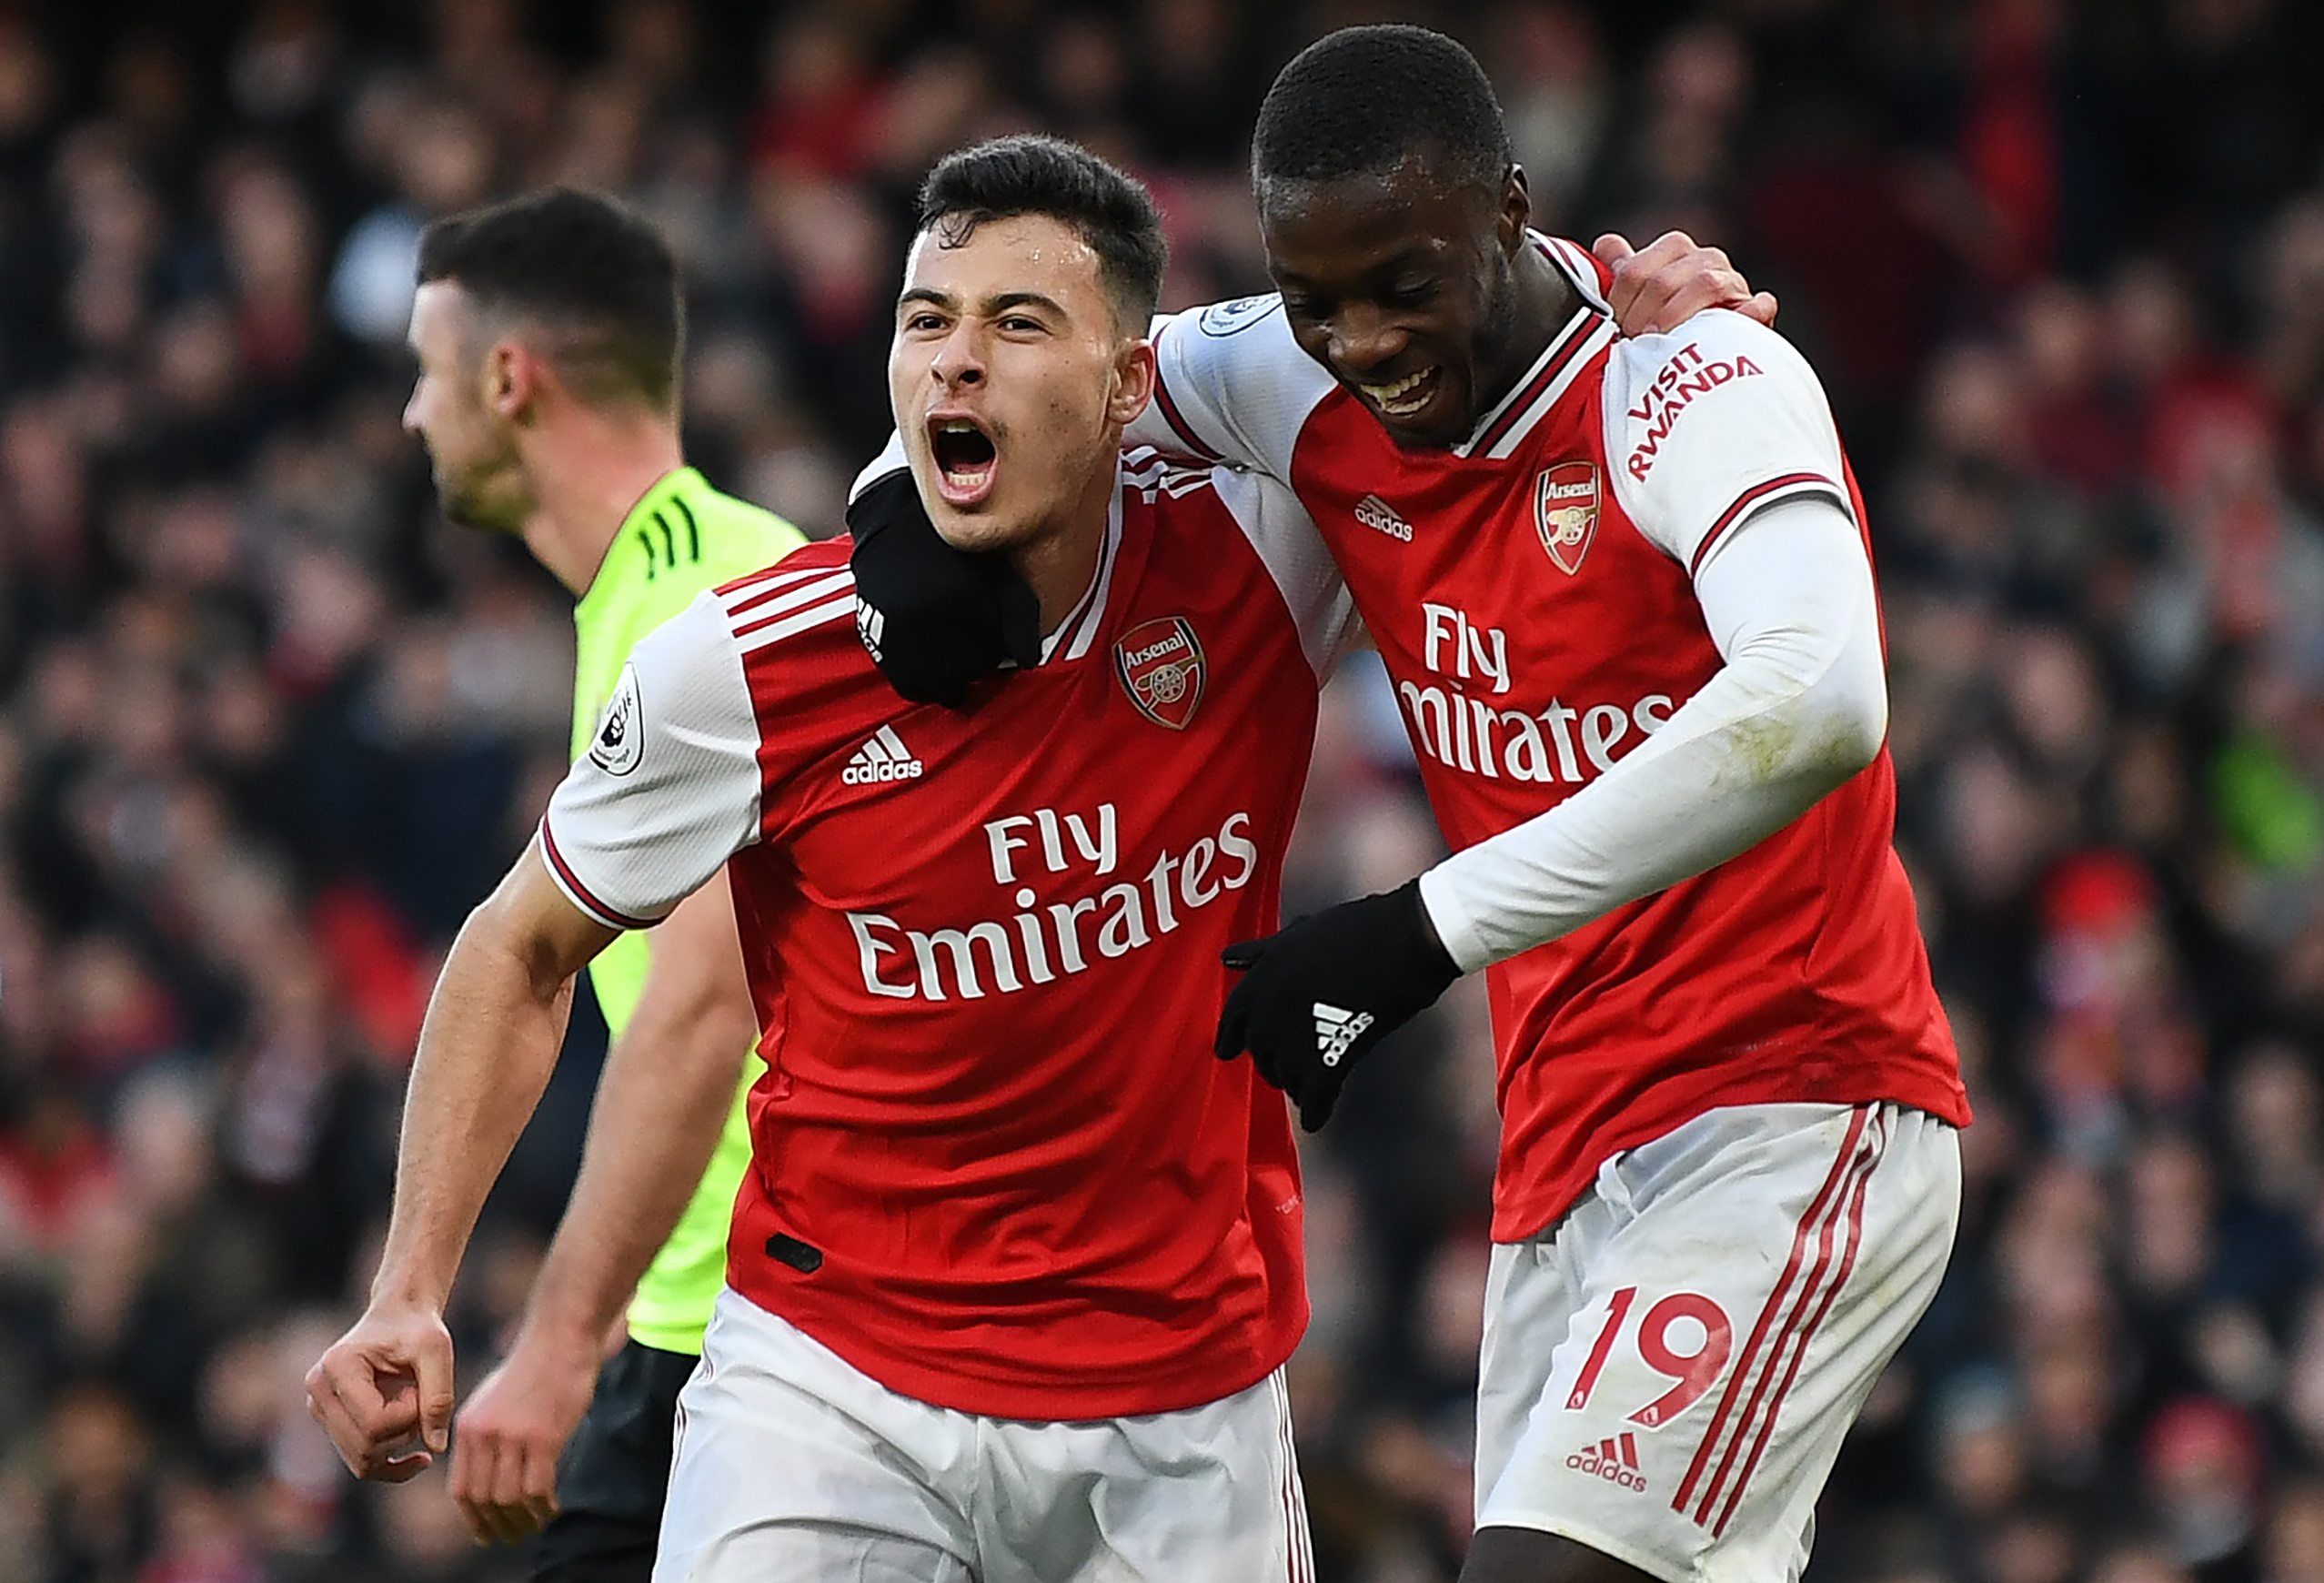 Arsenal's Brazilian striker Gabriel Martinelli (C) celebrates scoring the opening goal with Arsenal's French-born Ivorian midfielder Nicolas Pepe during the English Premier League football match between Arsenal and Sheffield United at the Emirates Stadium in London on January 18, 2020. (Photo by DANIEL LEAL-OLIVAS / AFP) / RESTRICTED TO EDITORIAL USE. No use with unauthorized audio, video, data, fixture lists, club/league logos or 'live' services. Online in-match use limited to 120 images. An additional 40 images may be used in extra time. No video emulation. Social media in-match use limited to 120 images. An additional 40 images may be used in extra time. No use in betting publications, games or single club/league/player publications. /  (Photo by DANIEL LEAL-OLIVAS/AFP via Getty Images)